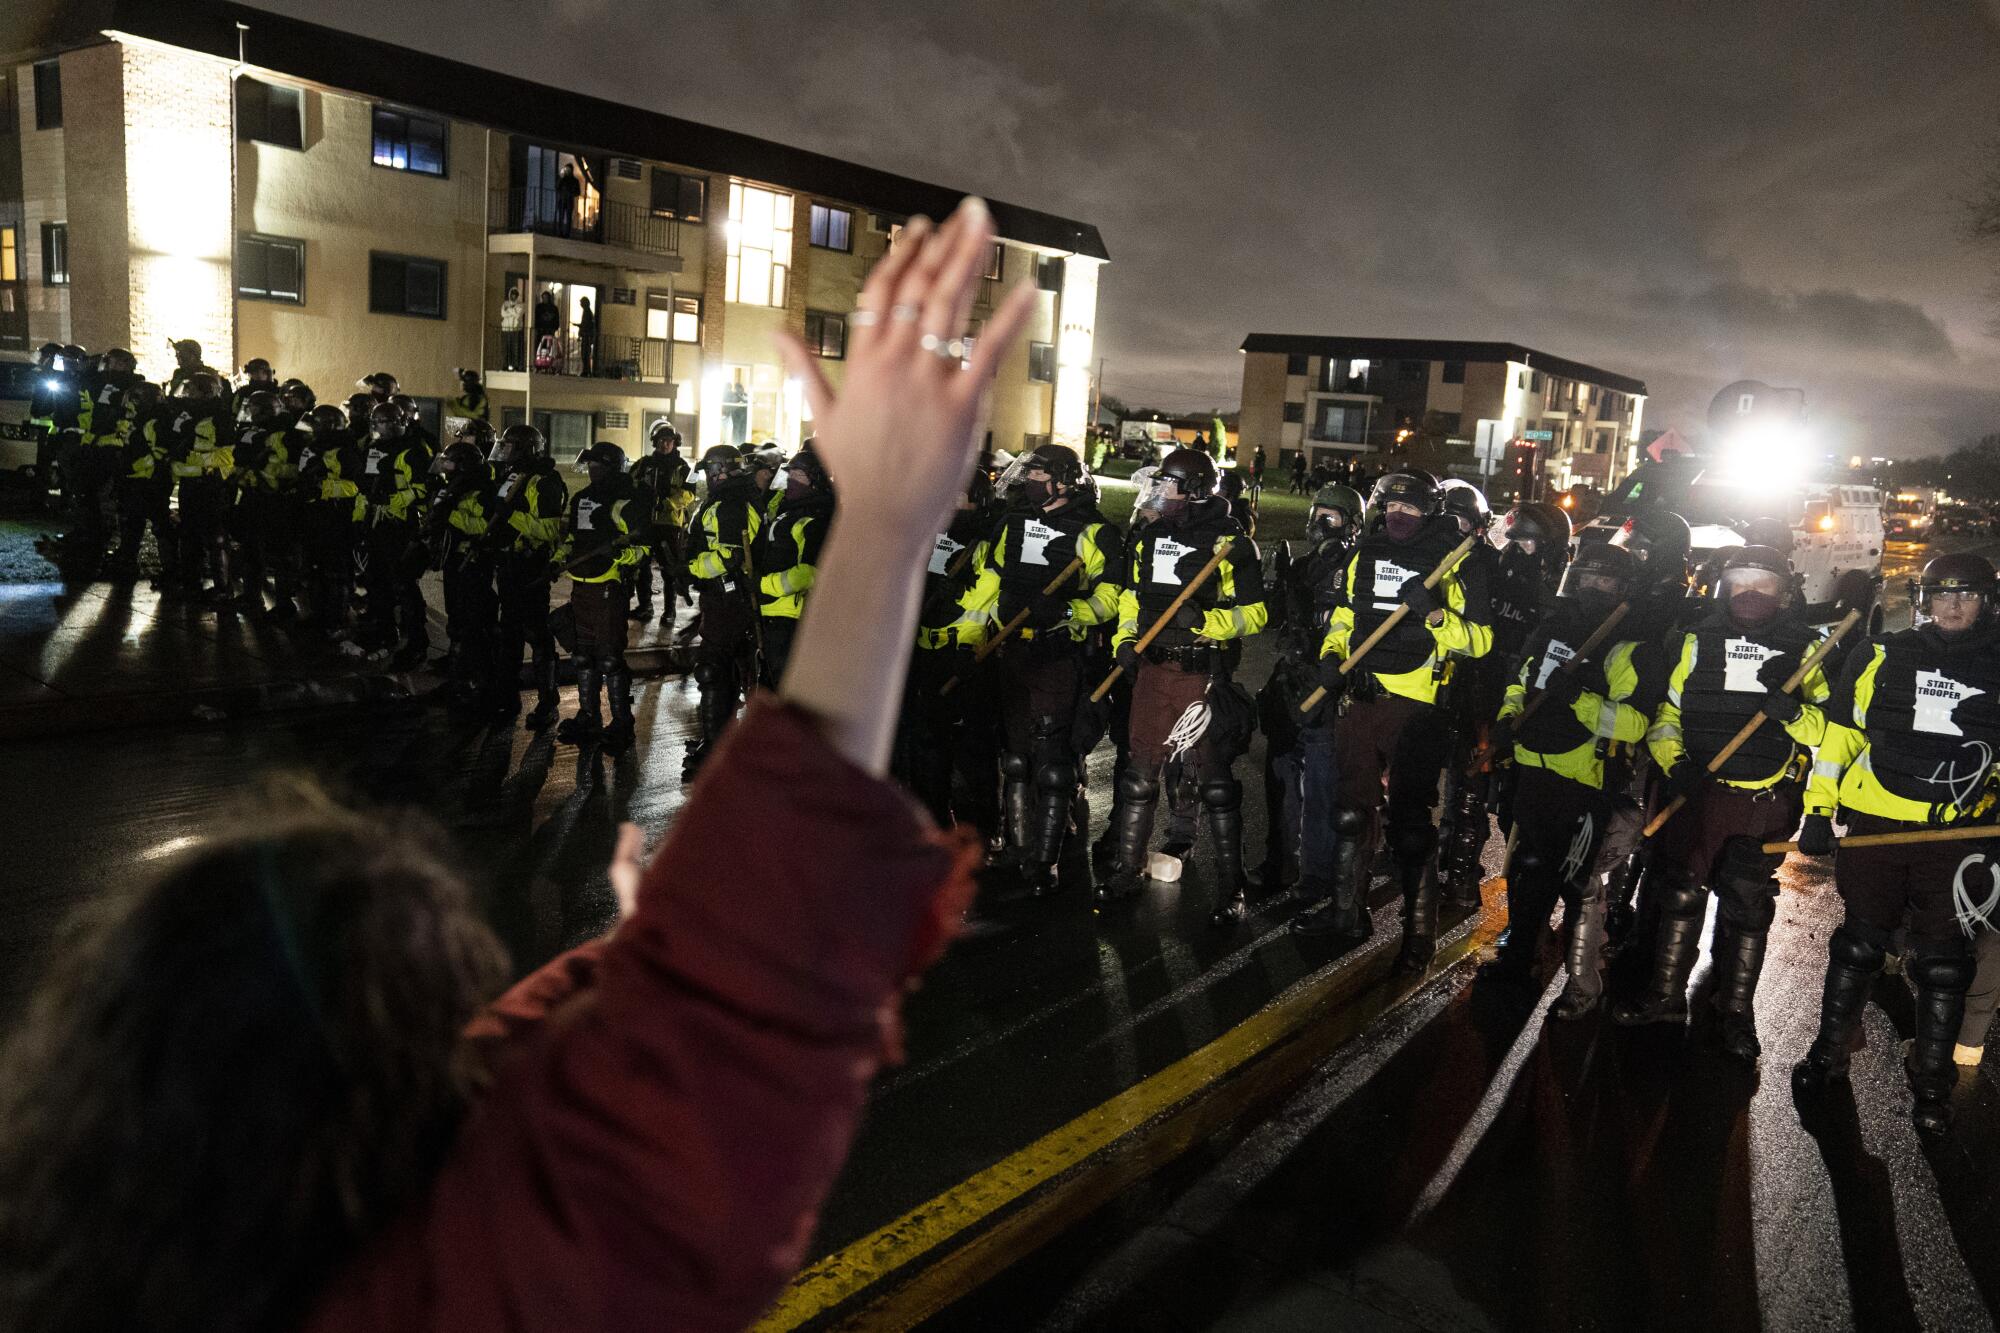 A person raises their hand facing a line of police